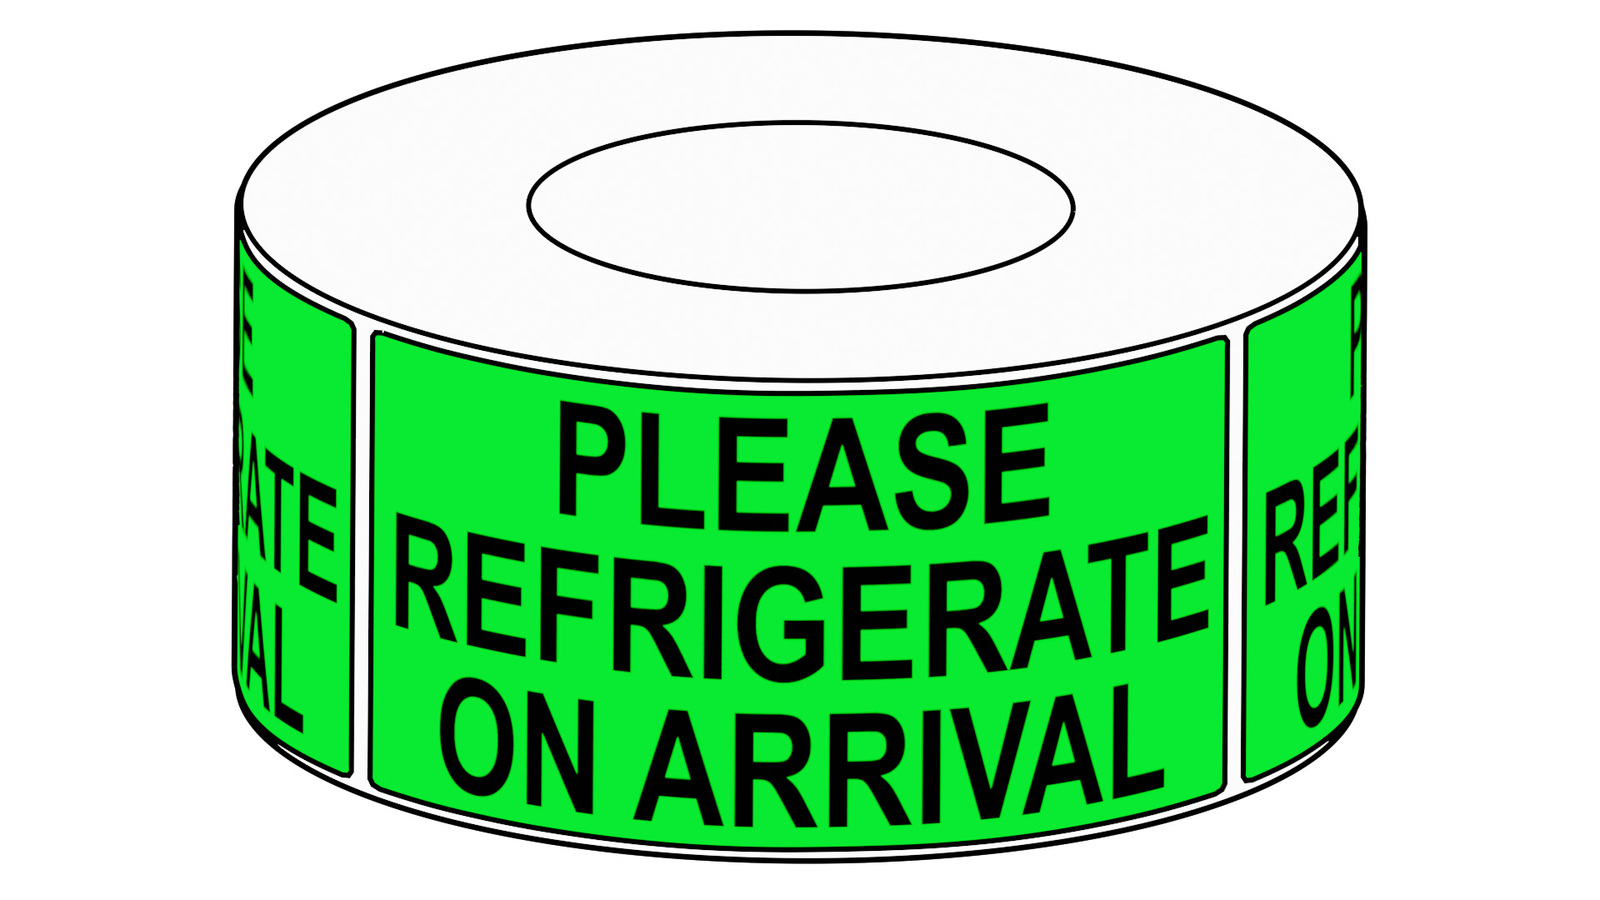 90 x 200mm Please Refrigerate On Arrival Label, 750 per roll, 76mm core